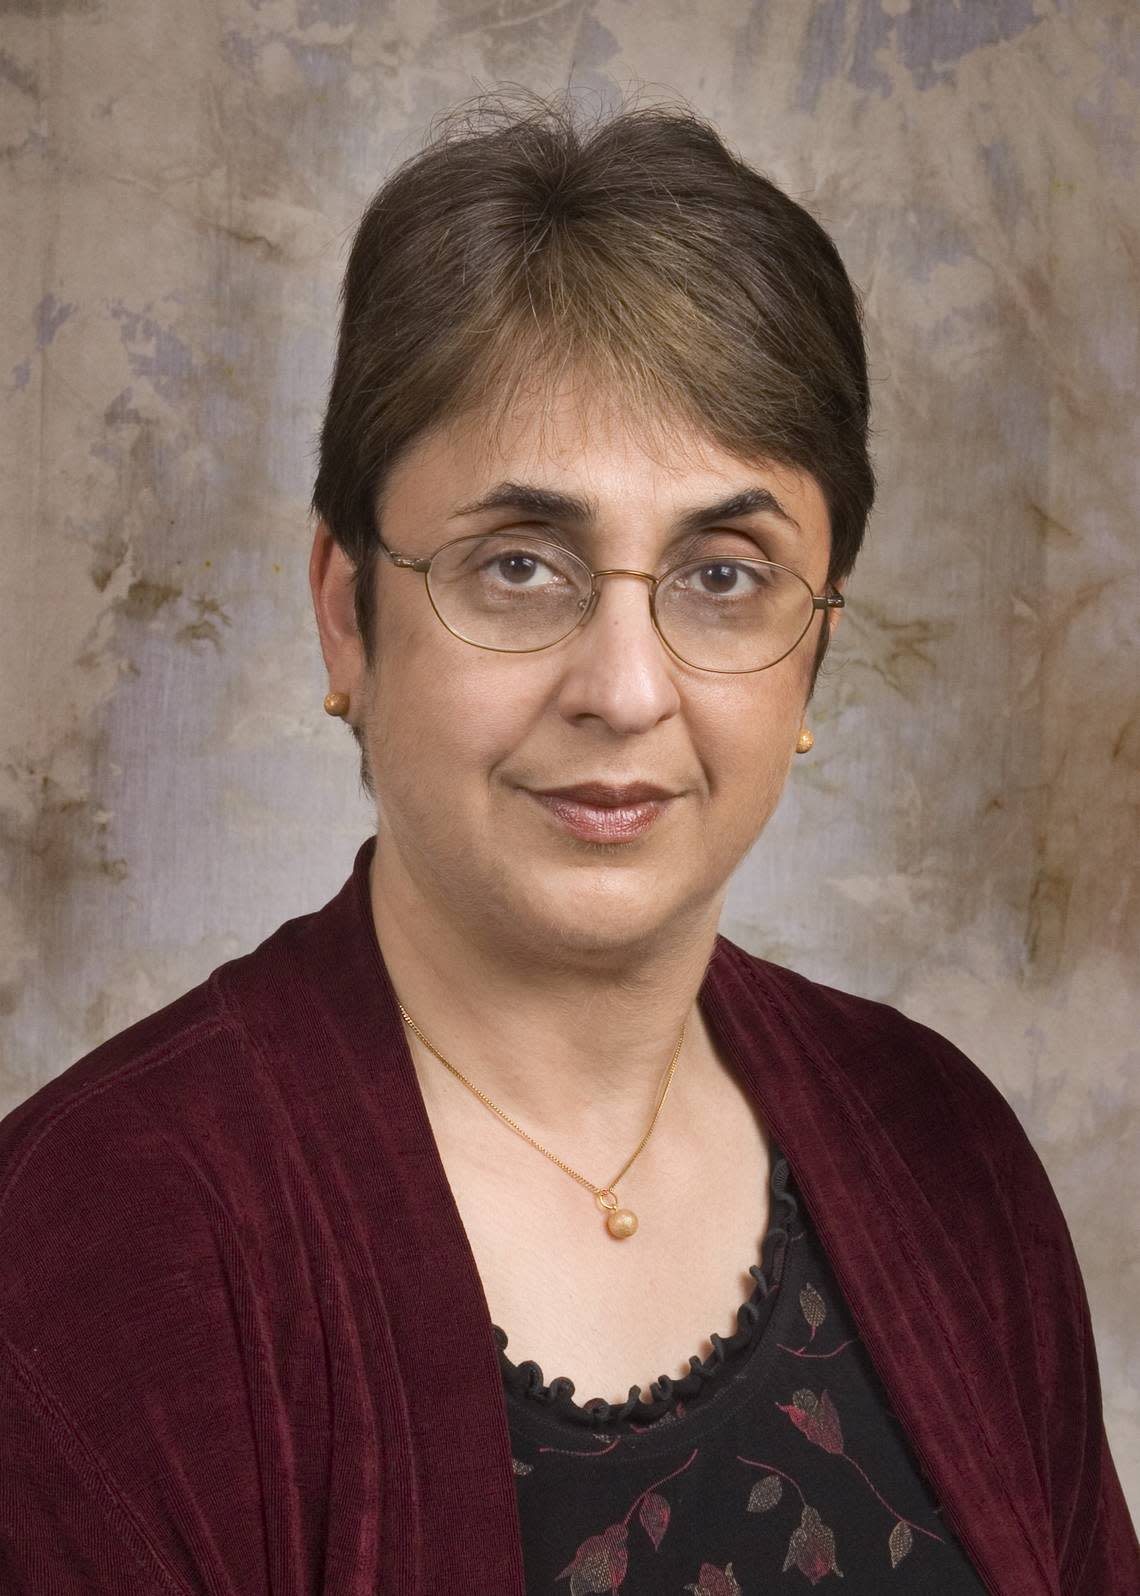 Dr. Shahnaz Duara, a professor of pediatrics at the Miller School of Medicine and the medical director of the Neonatal Intensive Care Unit at Holtz Children’s Hospital, a senior author on the COVID placenta study.